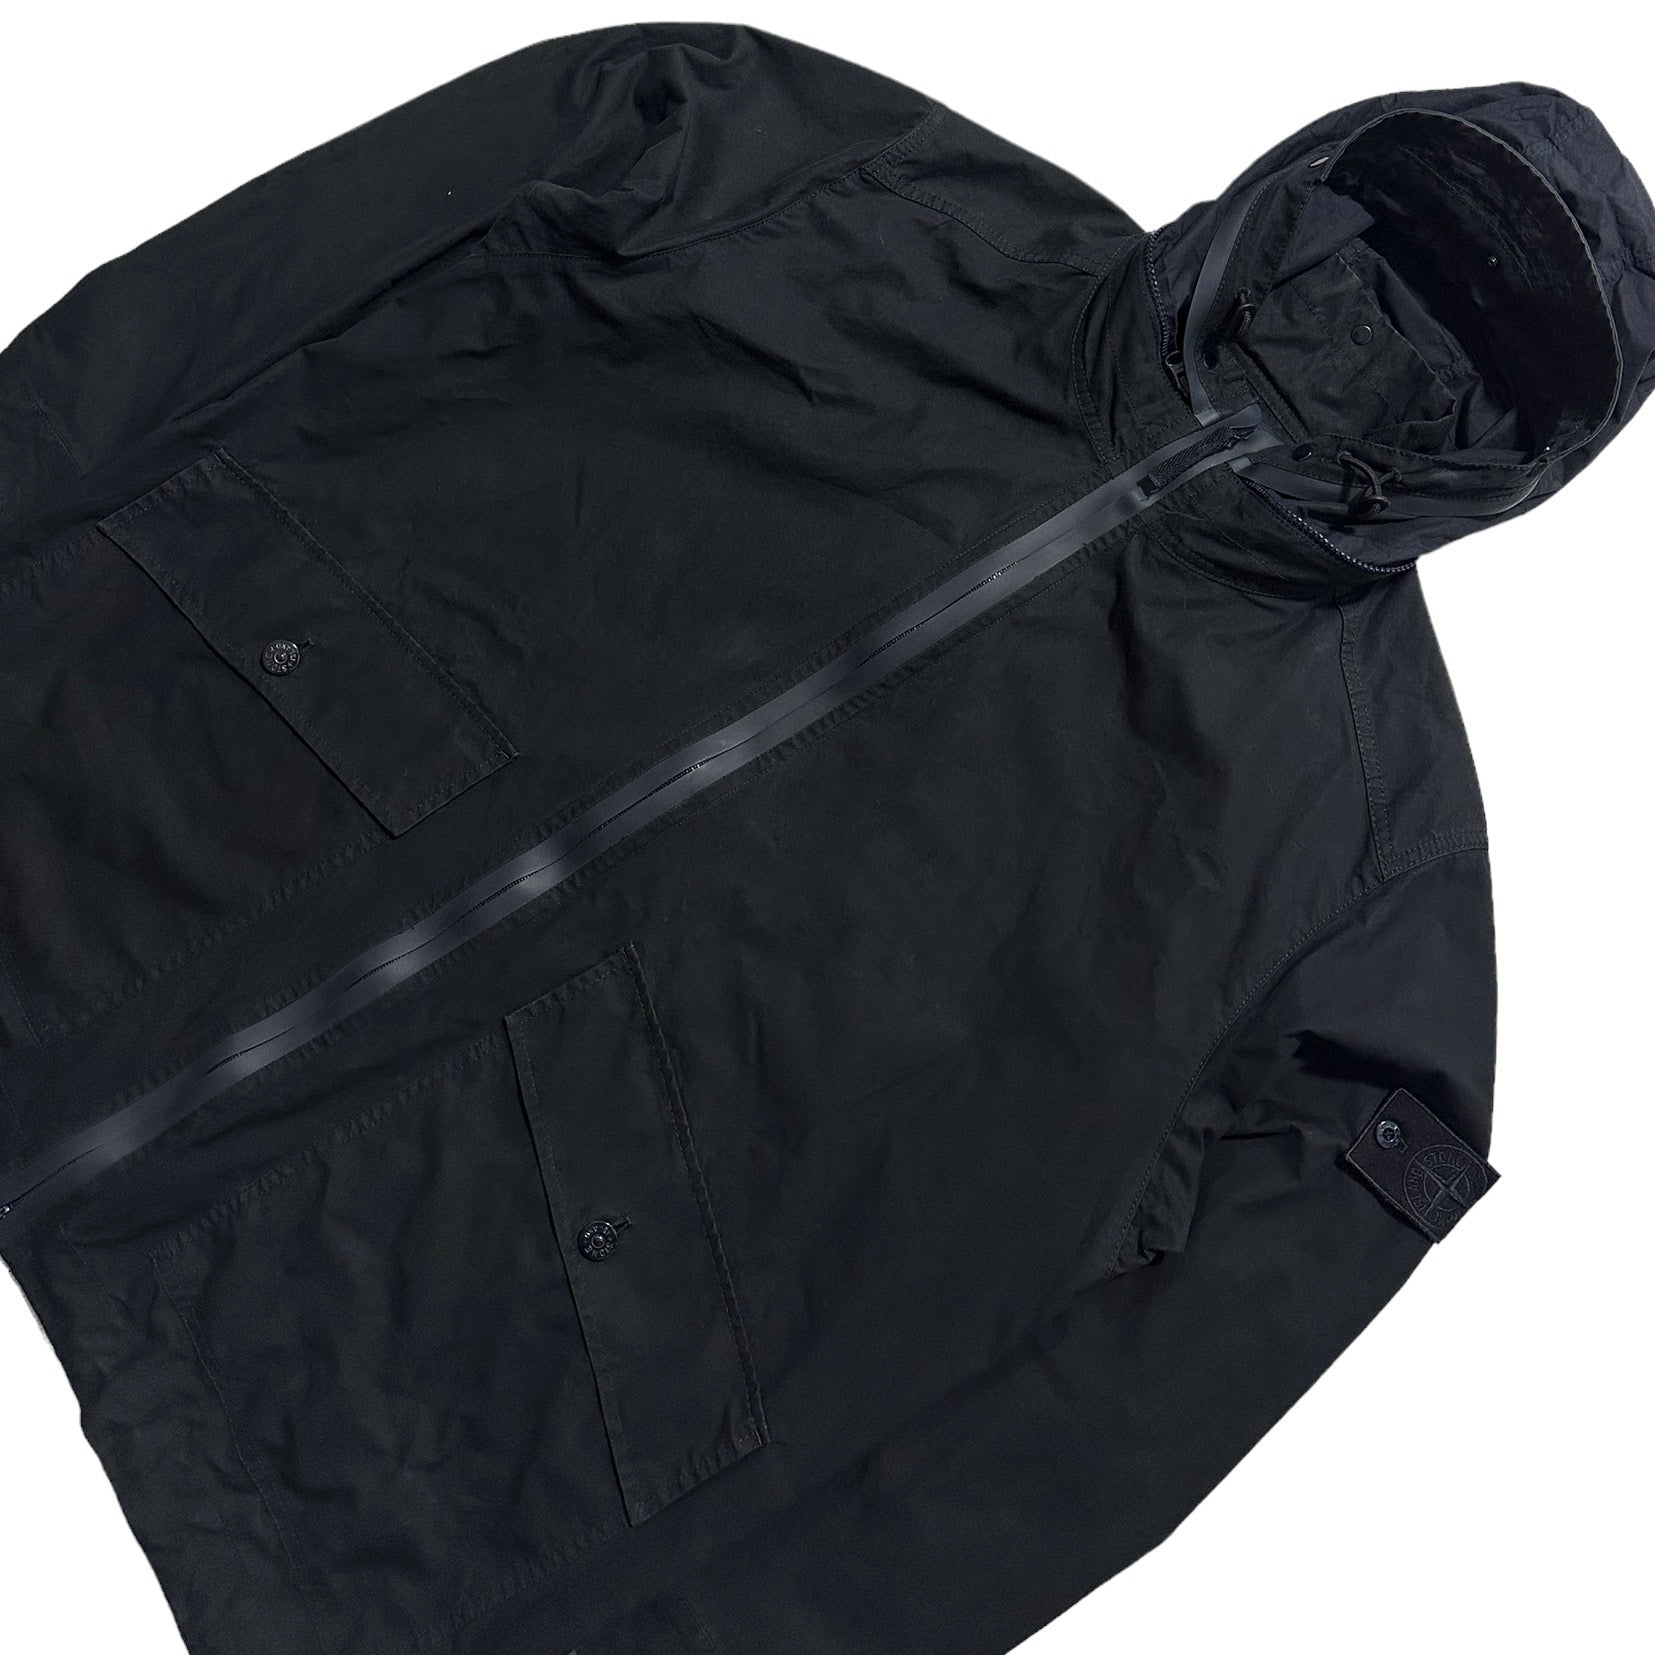 Stone Island Weatherproof Cotton Ghost Piece Parka Jacket with Packable Hood